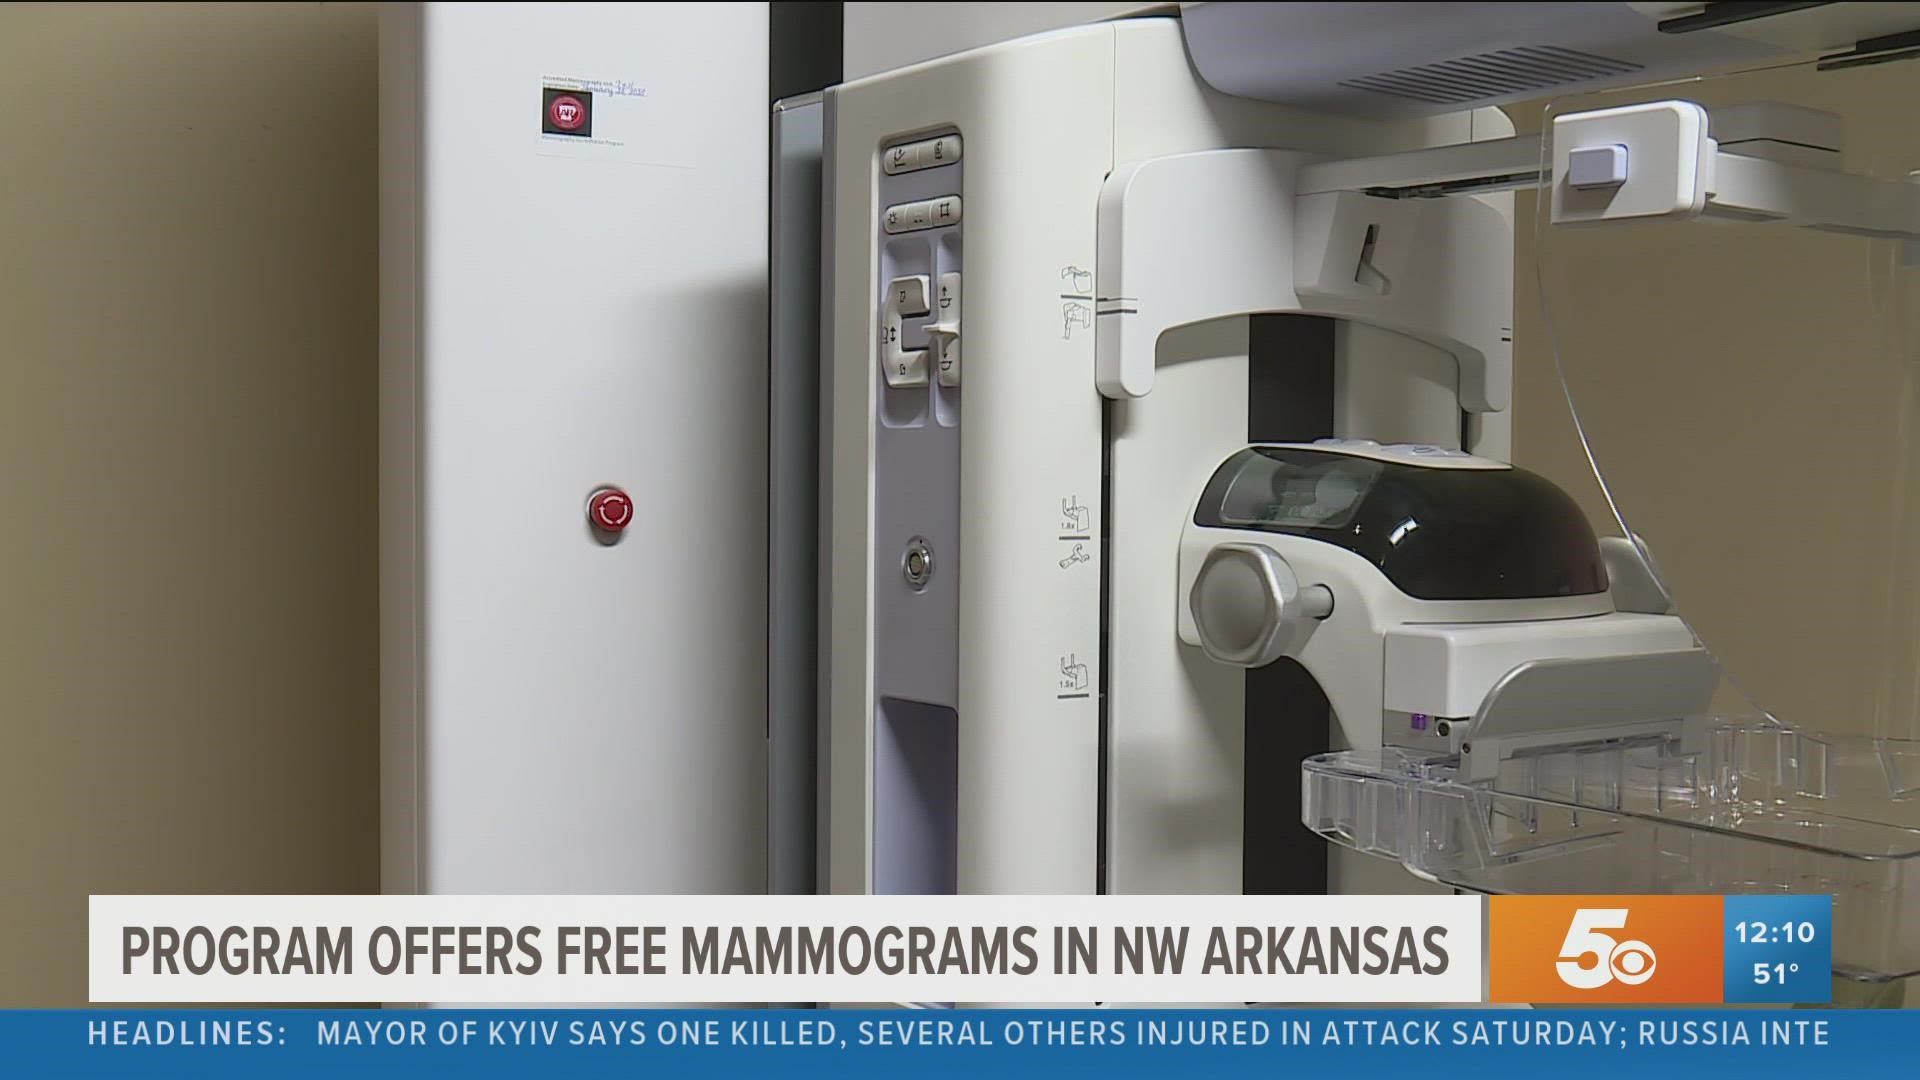 Free mammograms will be available for uninsured or underinsured women in Northwest Arkansas.